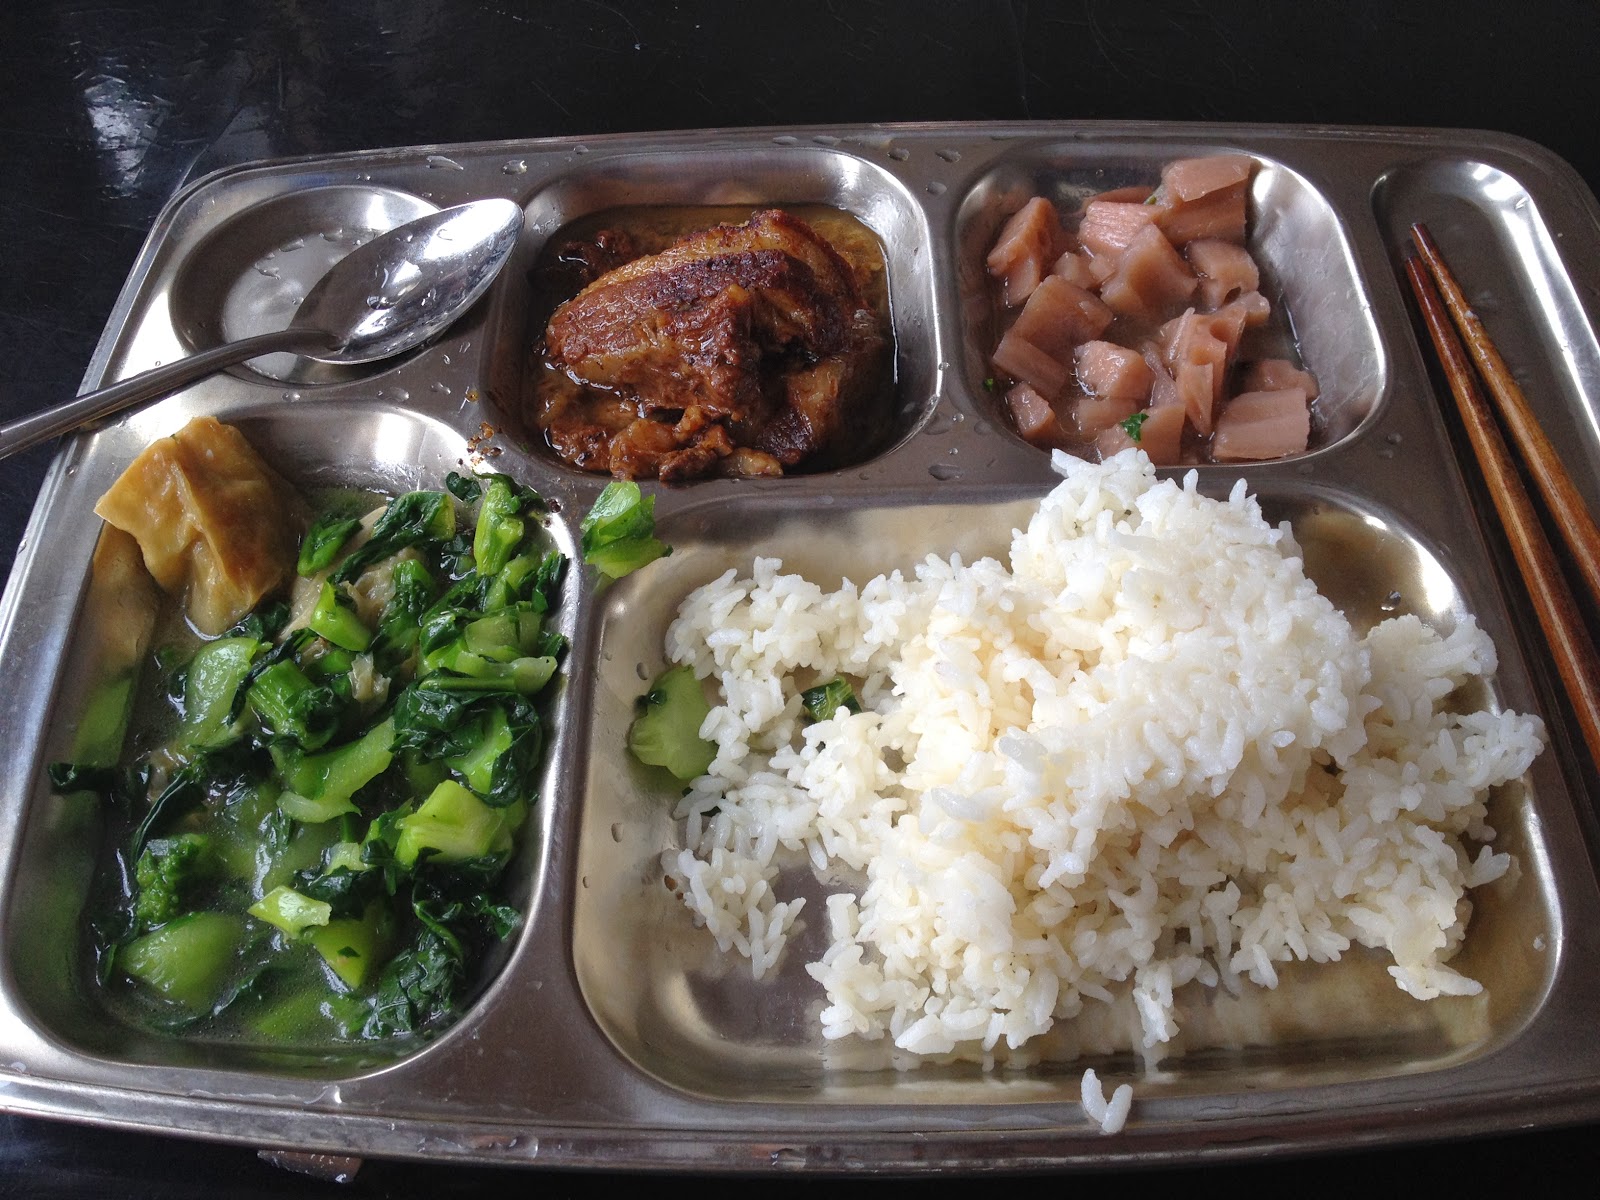 School lunch food in China